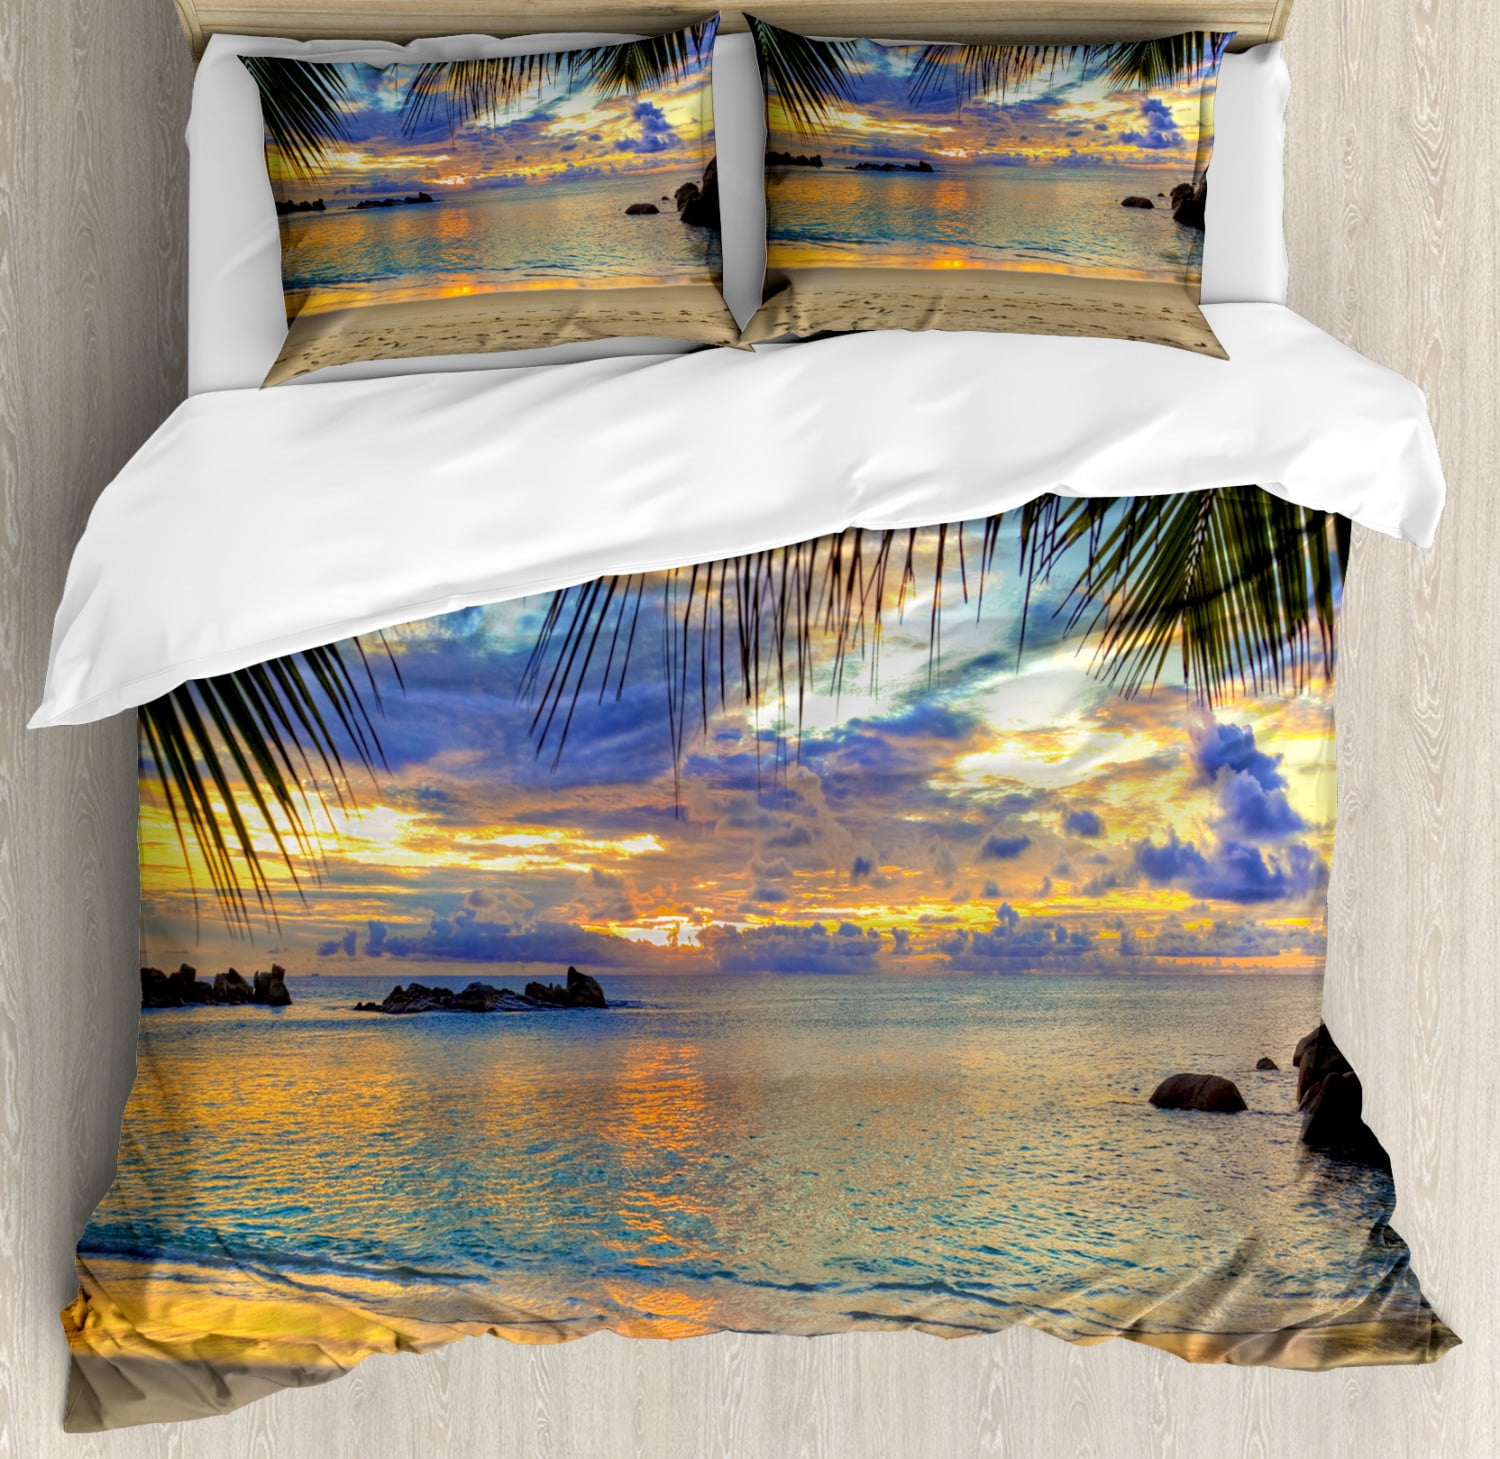 White Beige Queen Size Ambesonne Nautical Duvet Cover Set Sailing Ship Close to Sandy Beach in Moody Sunset Paradise Tropical Theme Decorative 3 Piece Bedding Set with 2 Pillow Shams